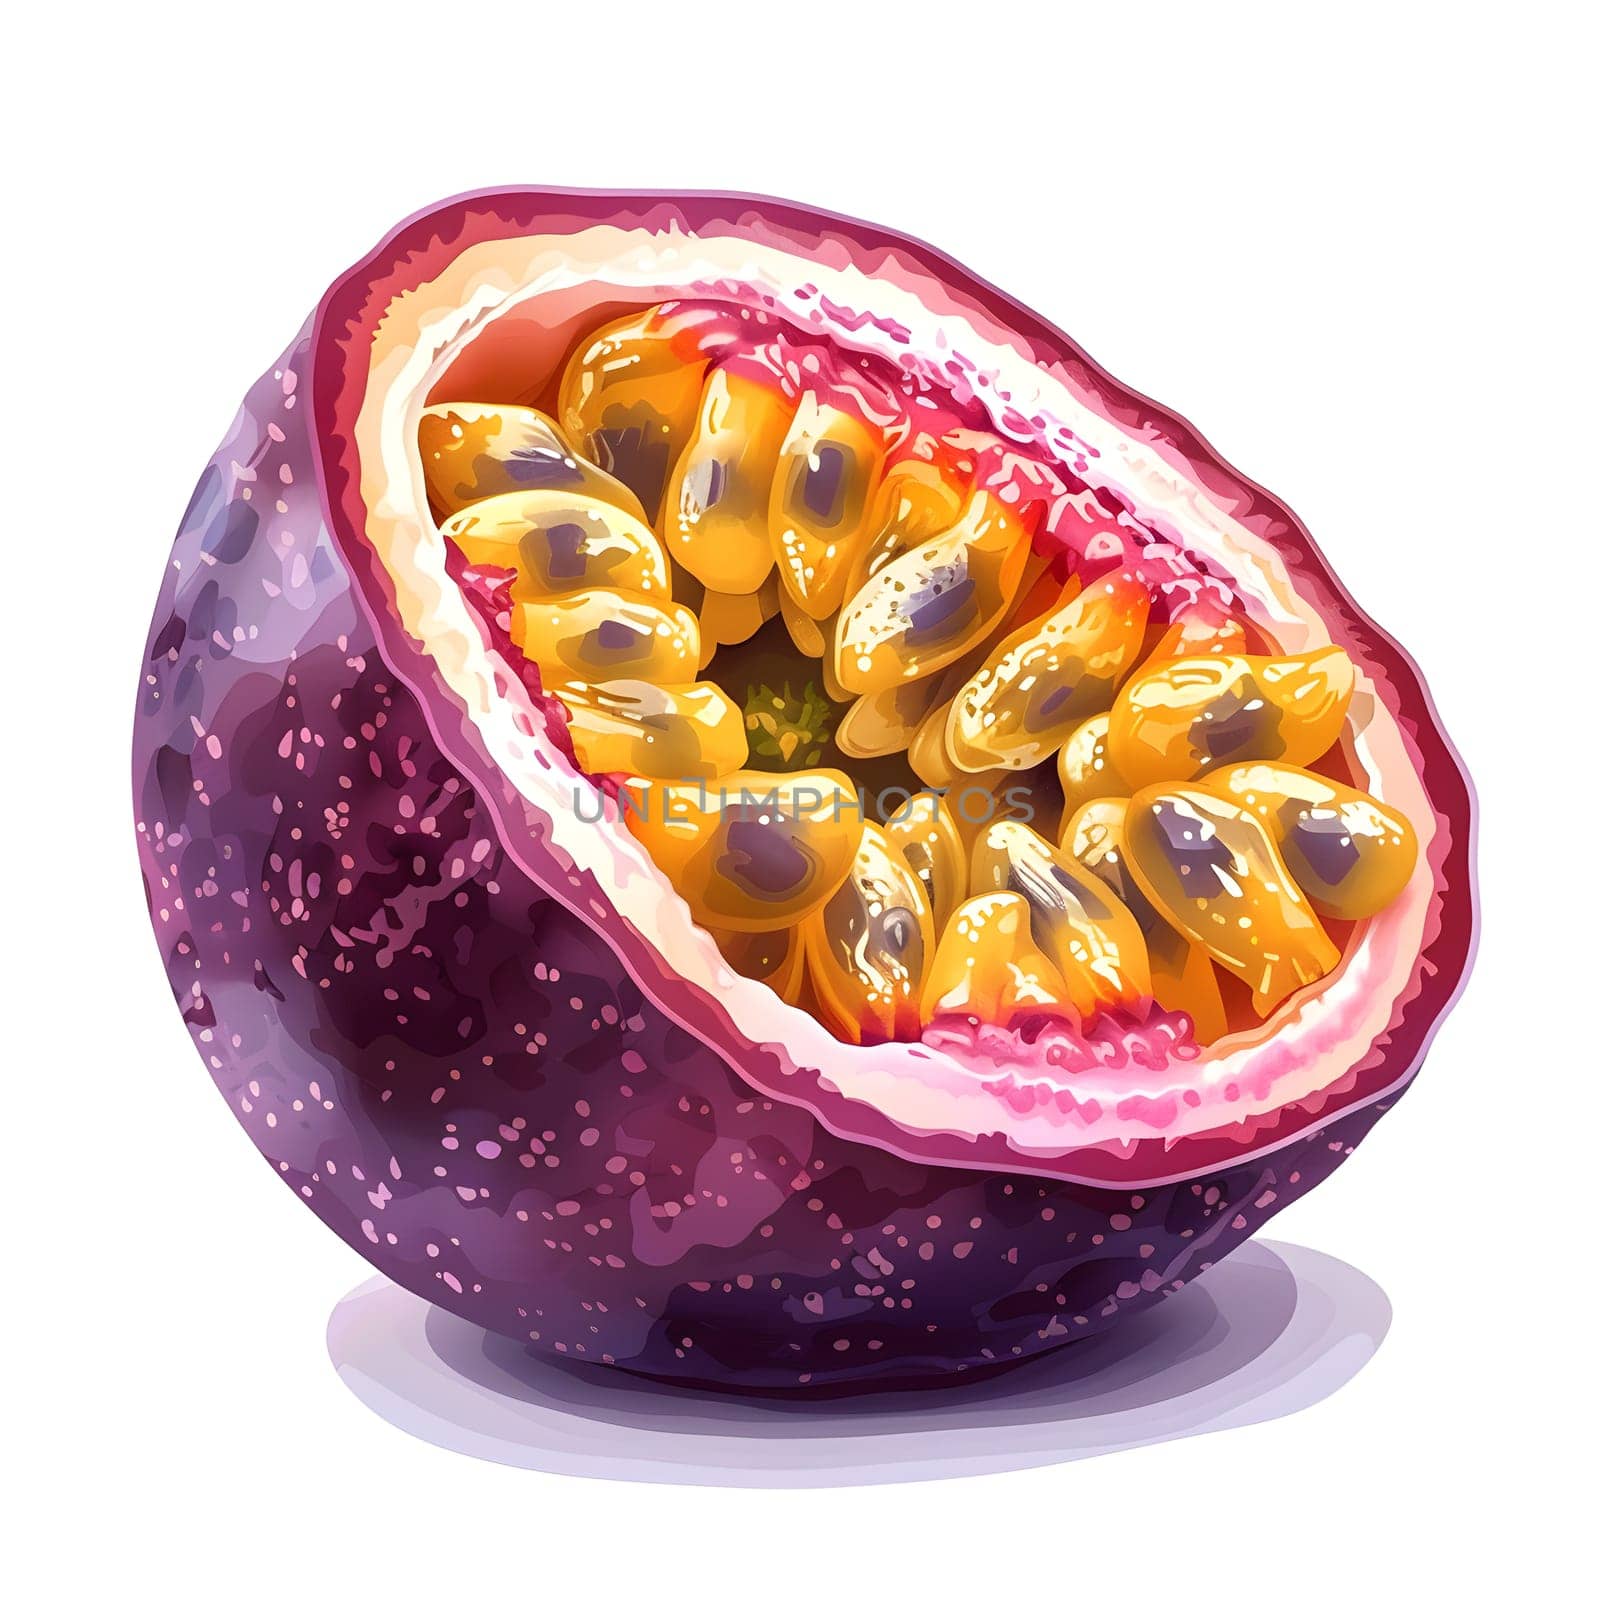 Sliced purple passion fruit, a natural ingredient for food and cuisine by Nadtochiy